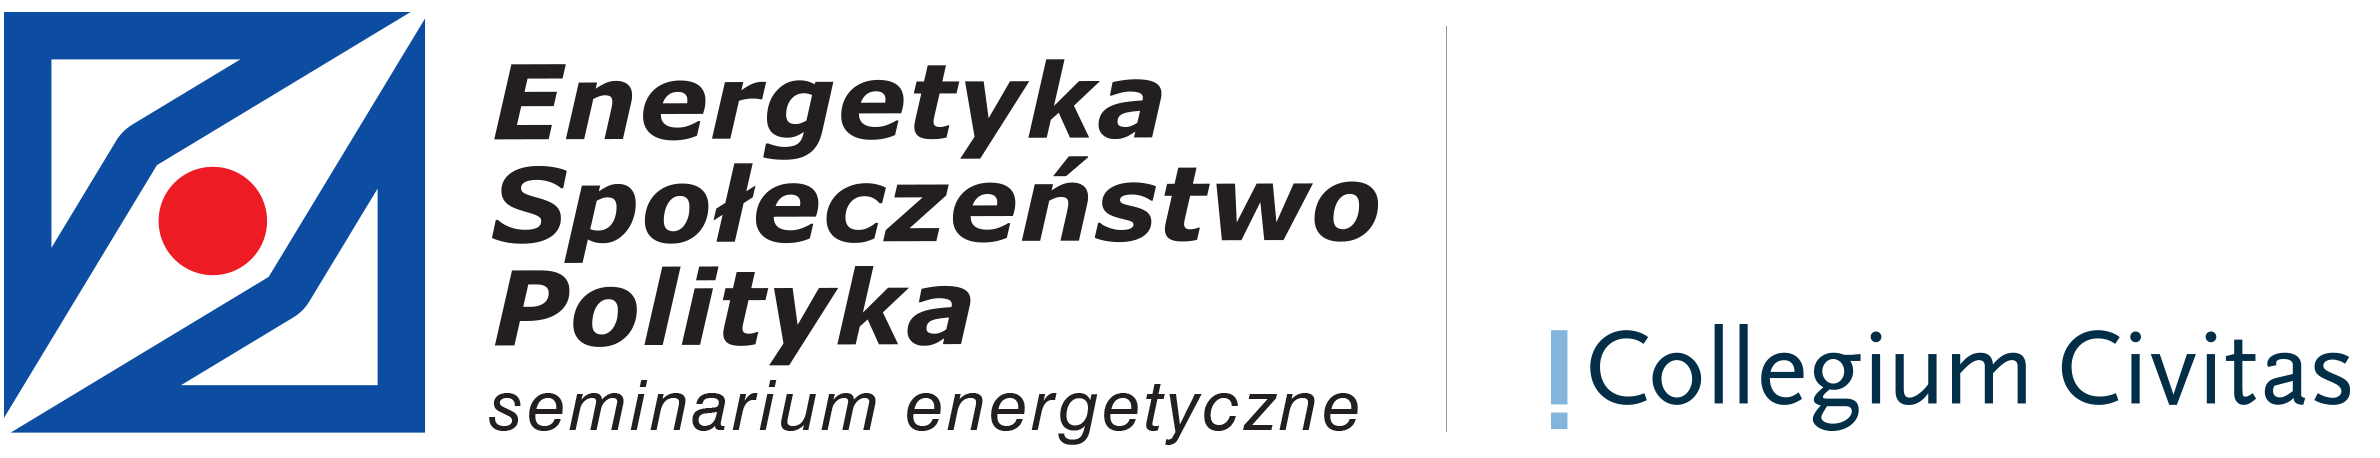 Problems of the Polish energy system from the sociological perspective Cover Image